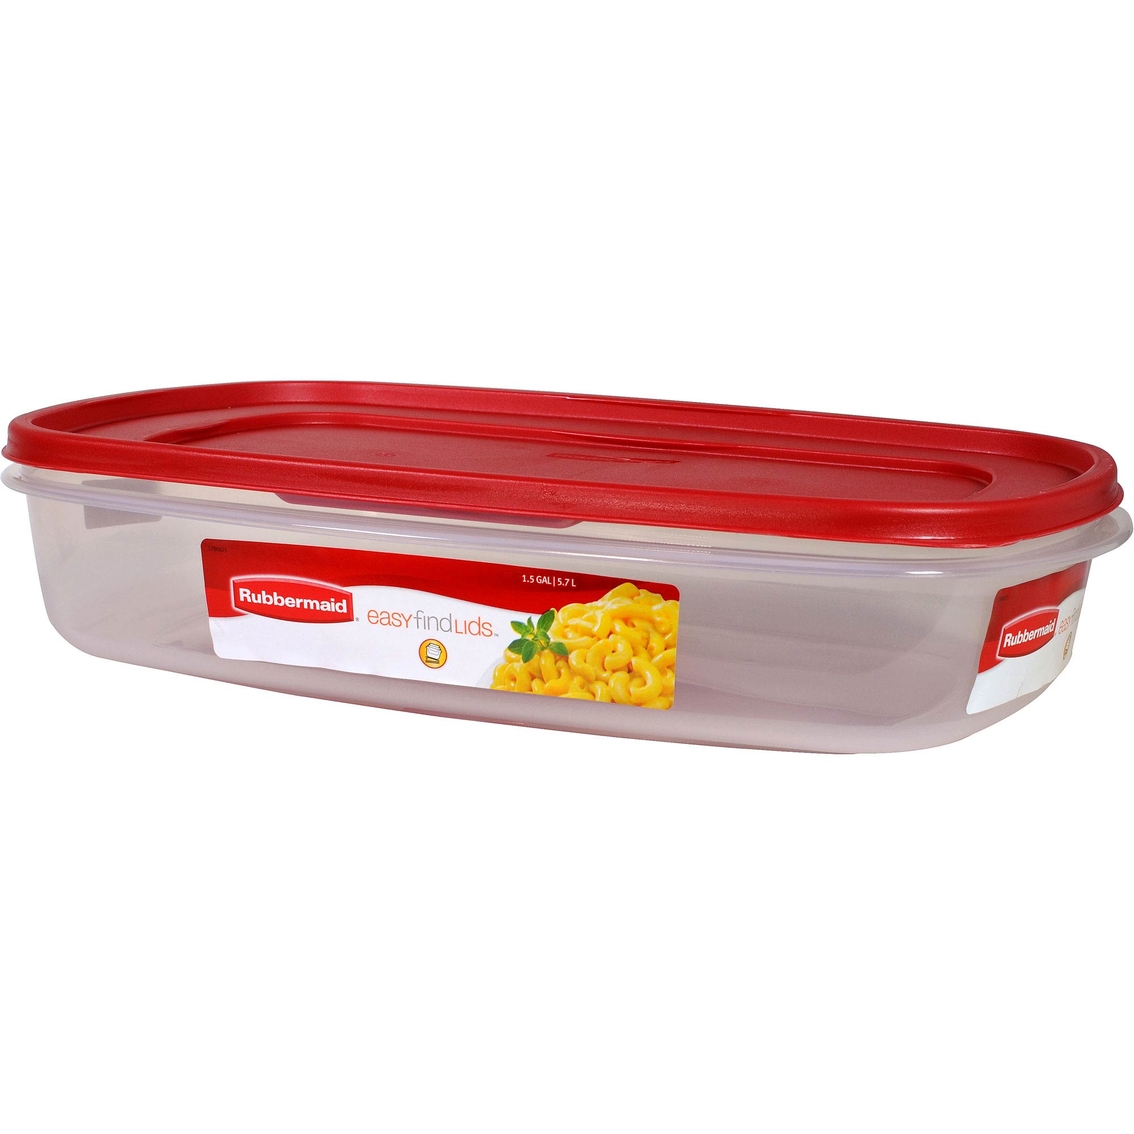  Rubbermaid Easy Find Lids Food Storage Container, 1.5